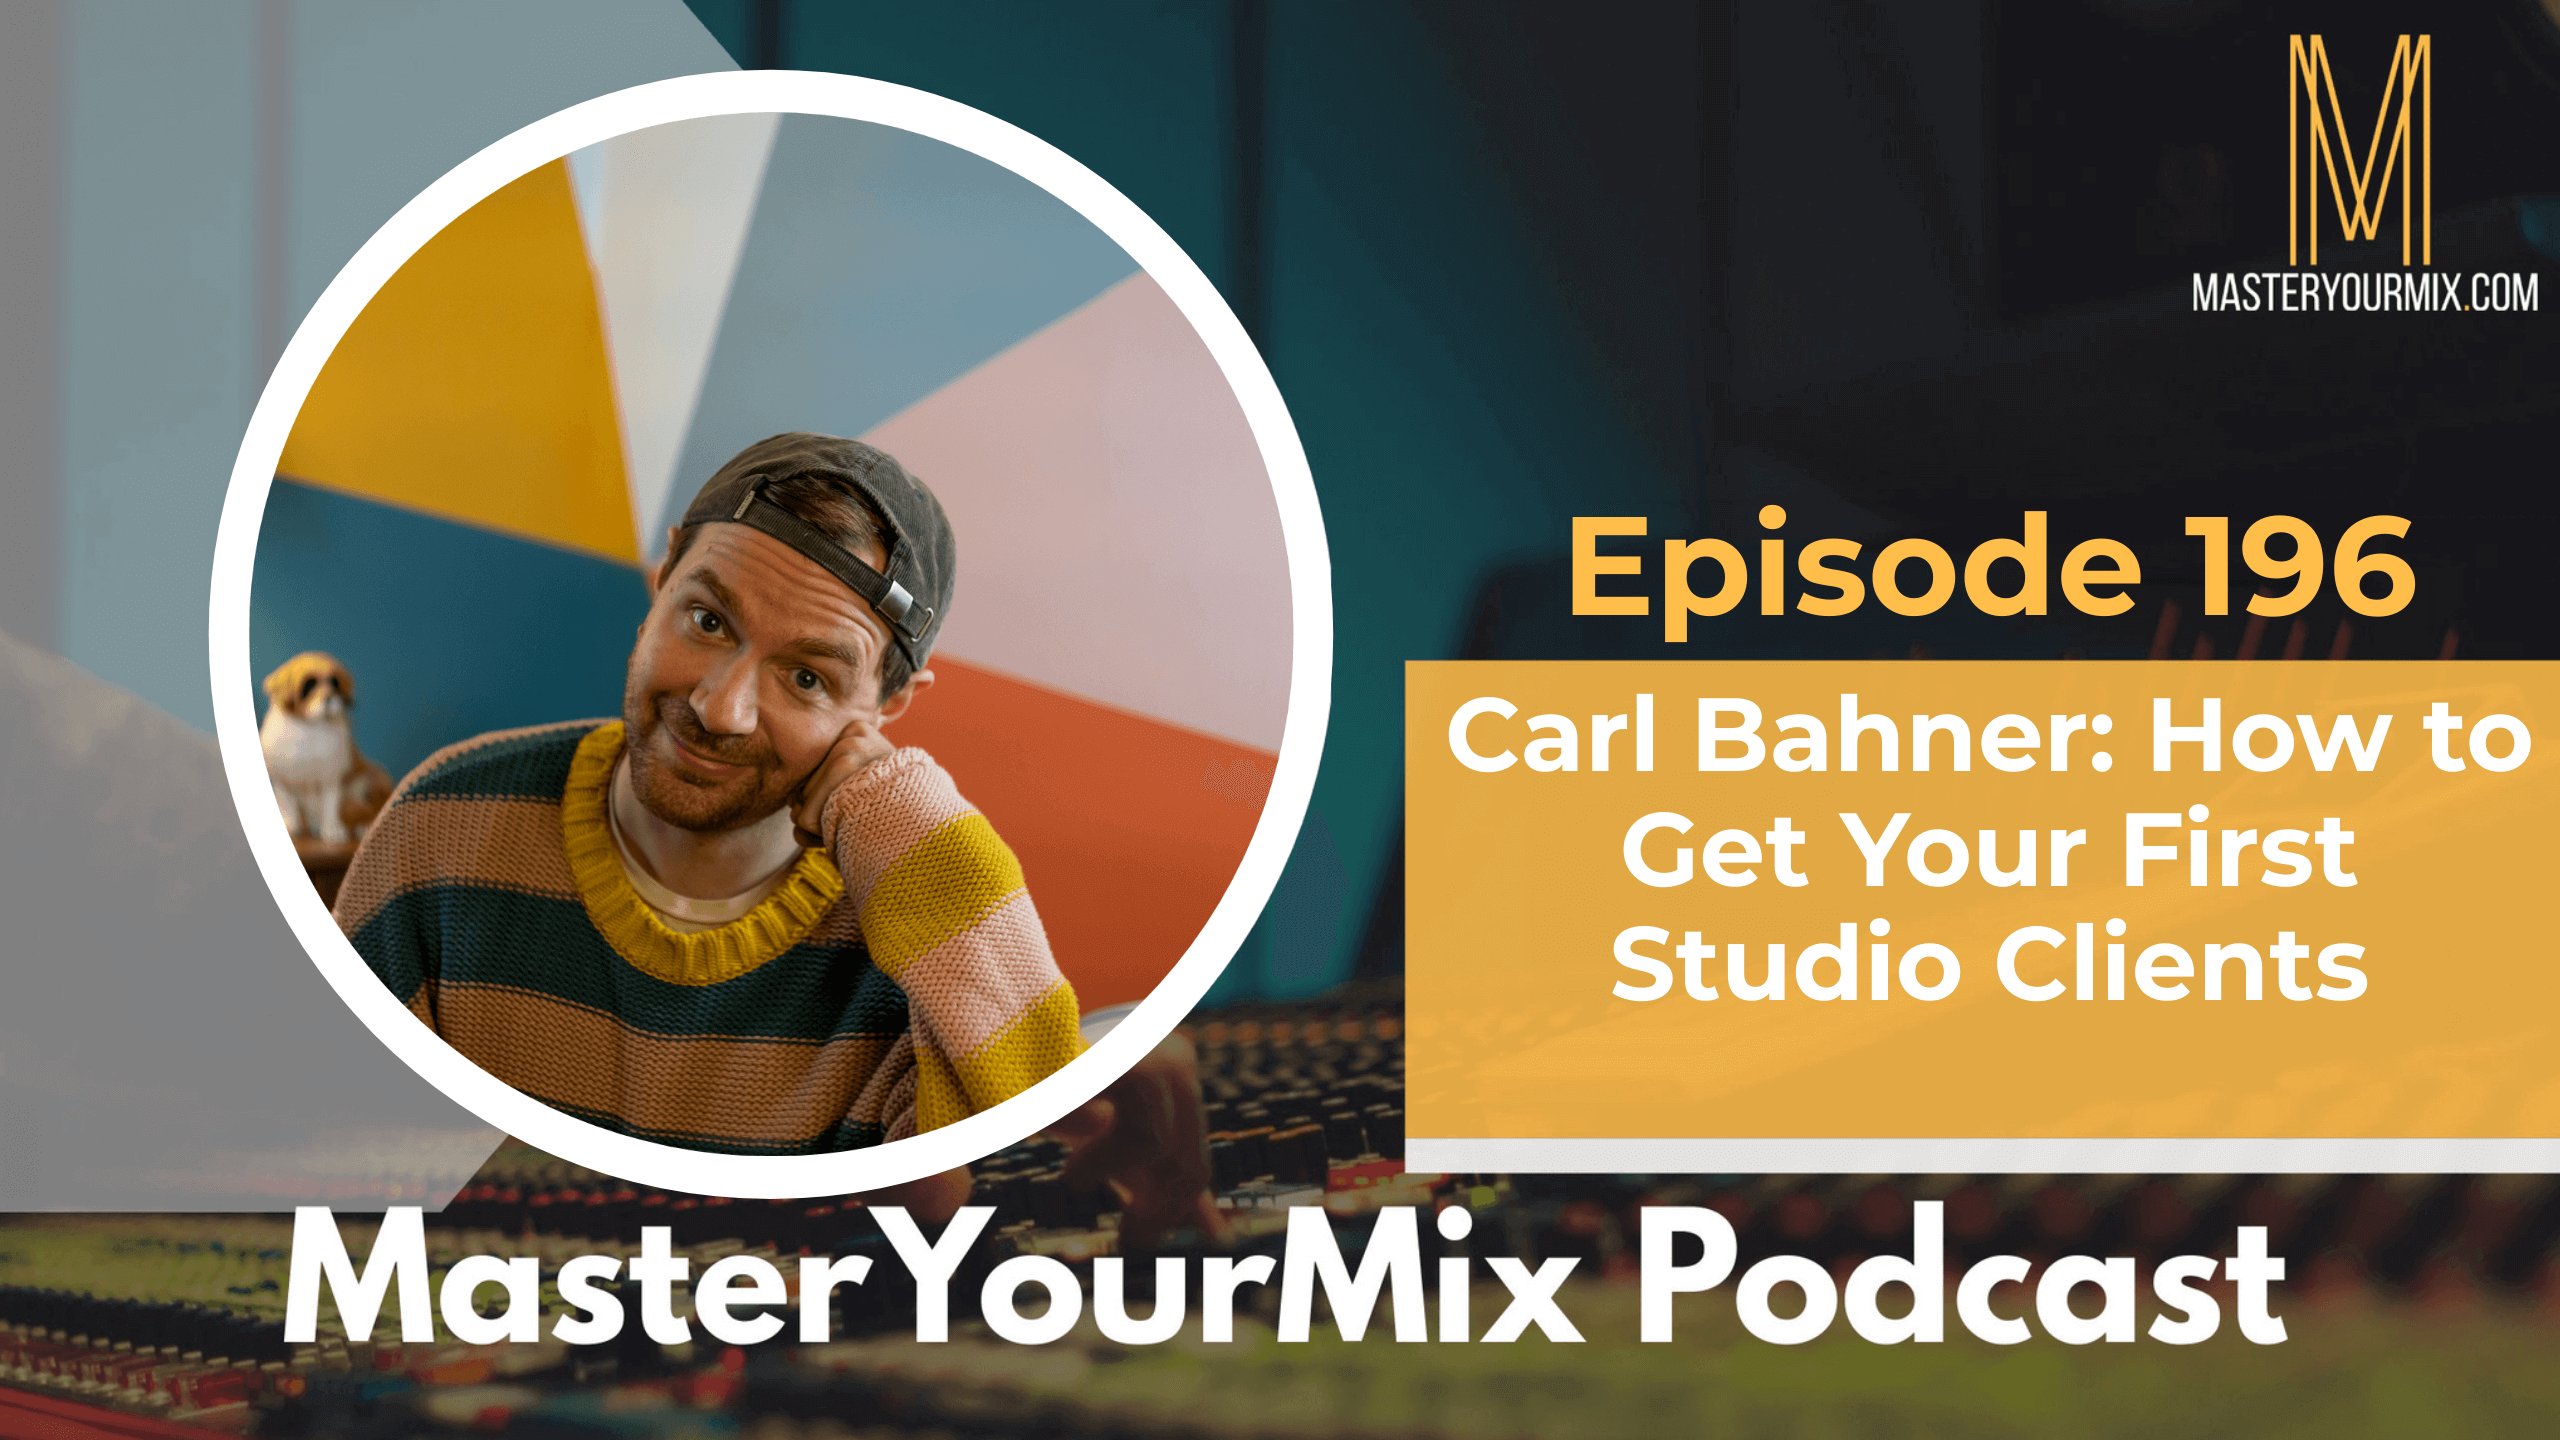 master your mix podcast, ep 196 carl bahner